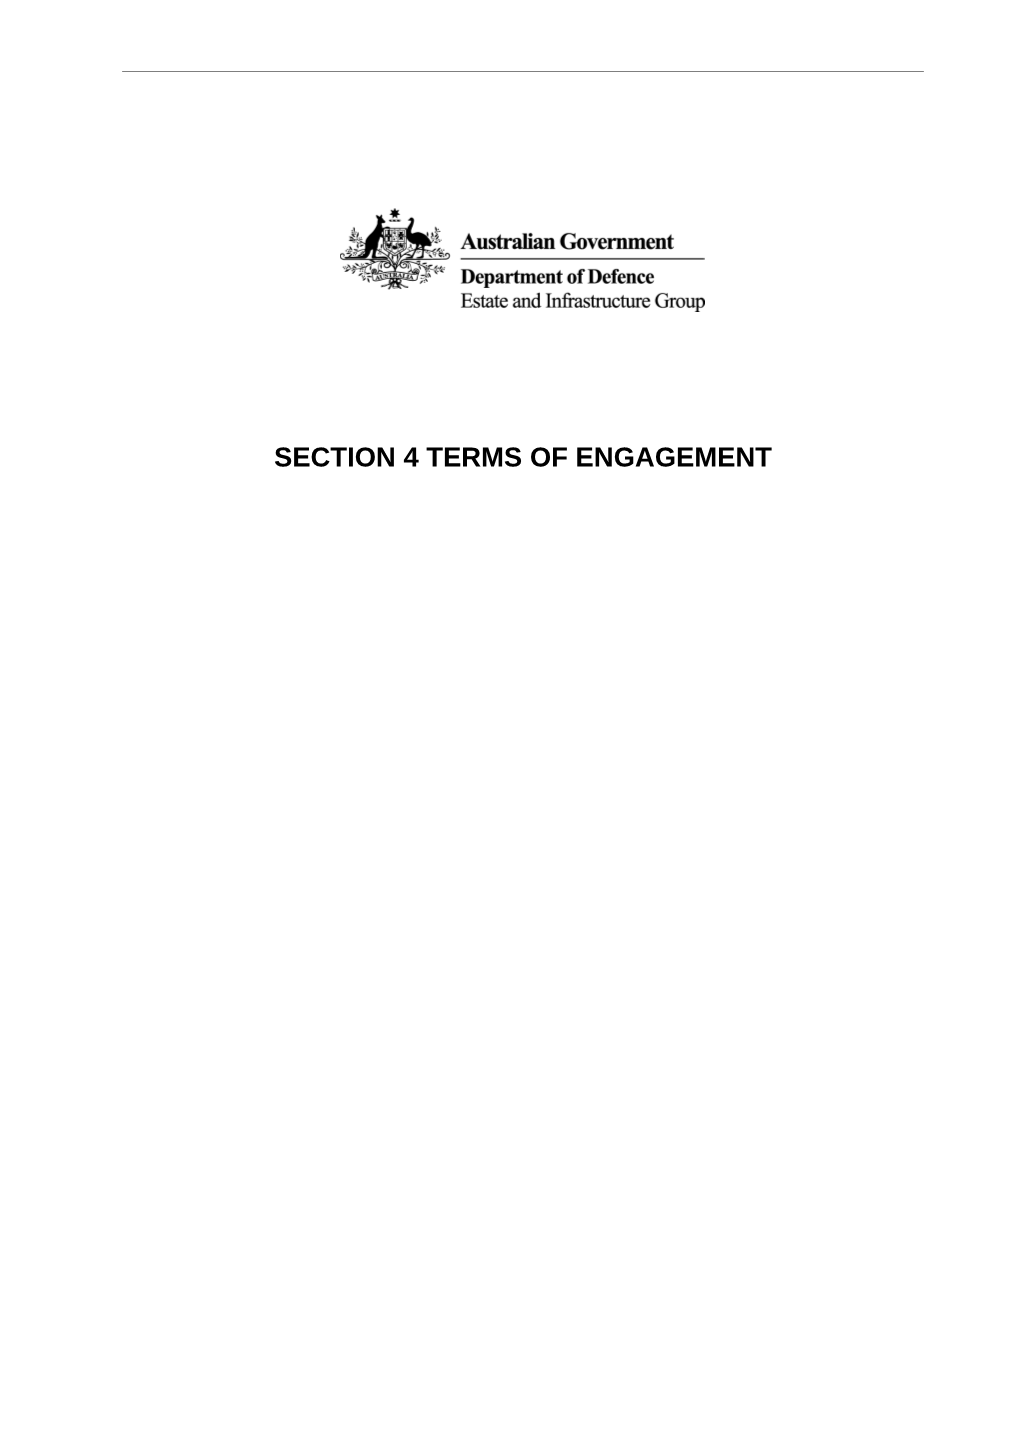 Section 4 Terms of ENGAGEMENT